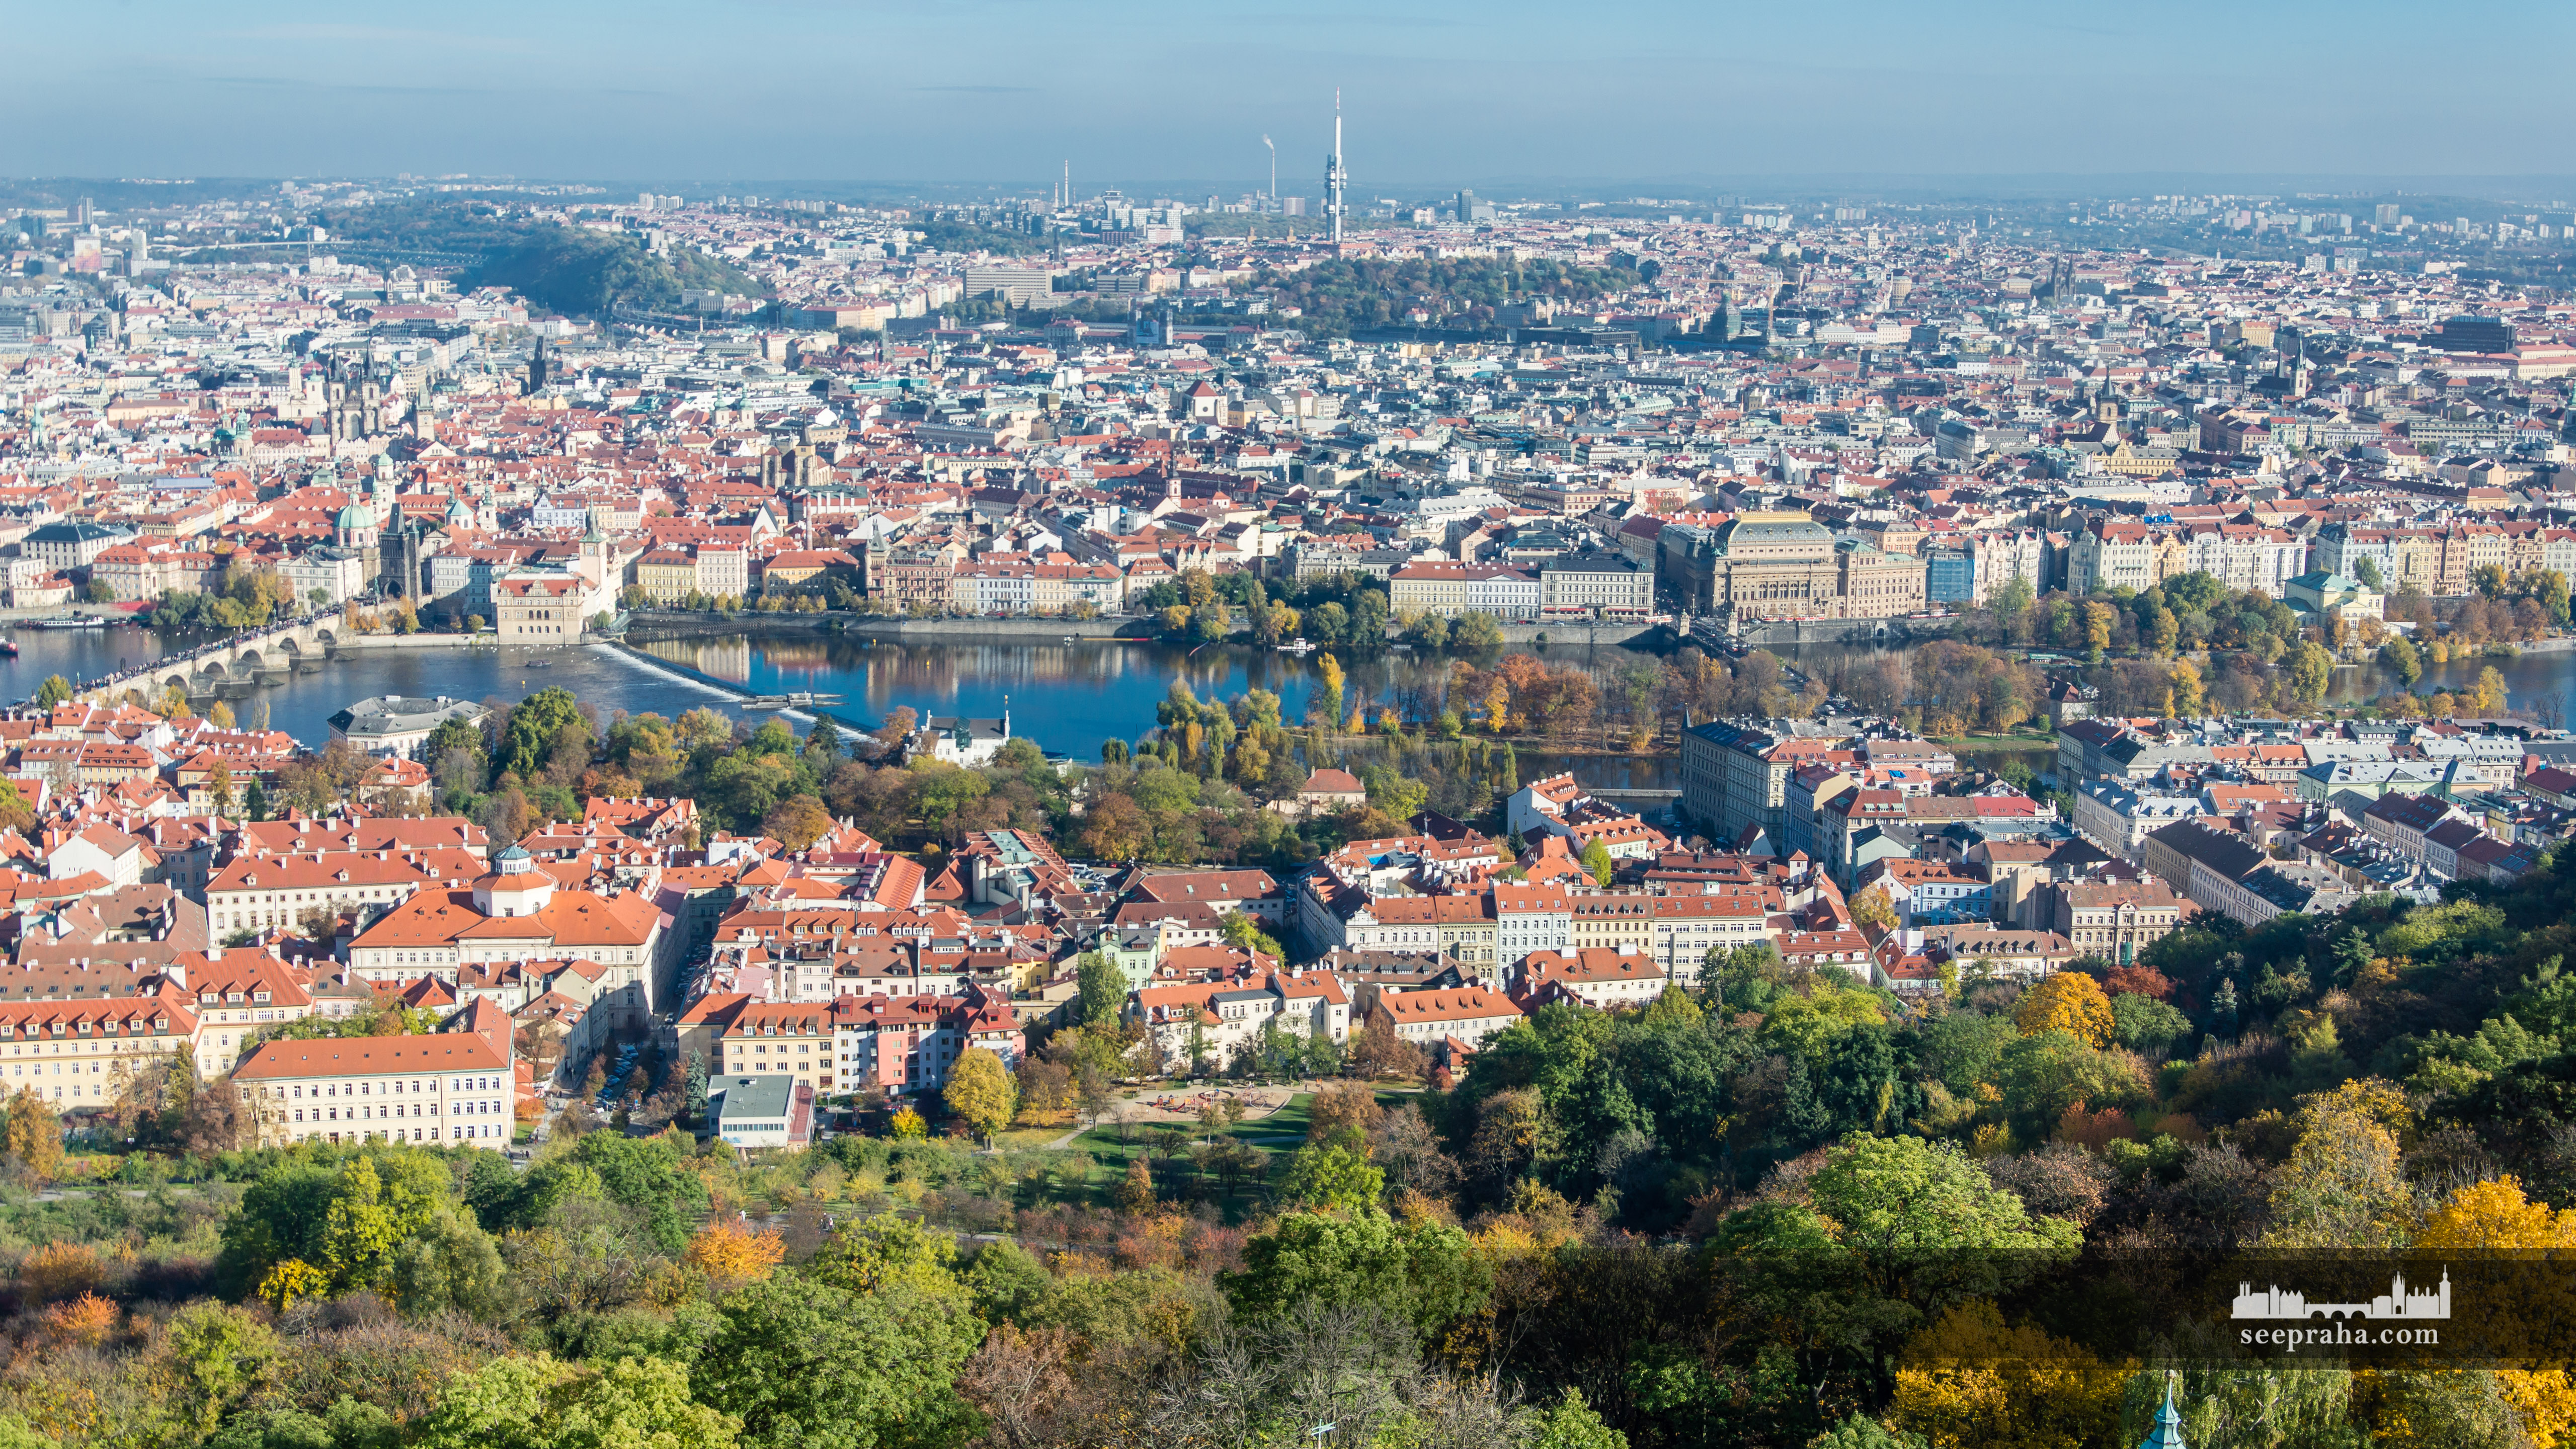 View of the city from the Petrin Tower, Prague, Czech Republic